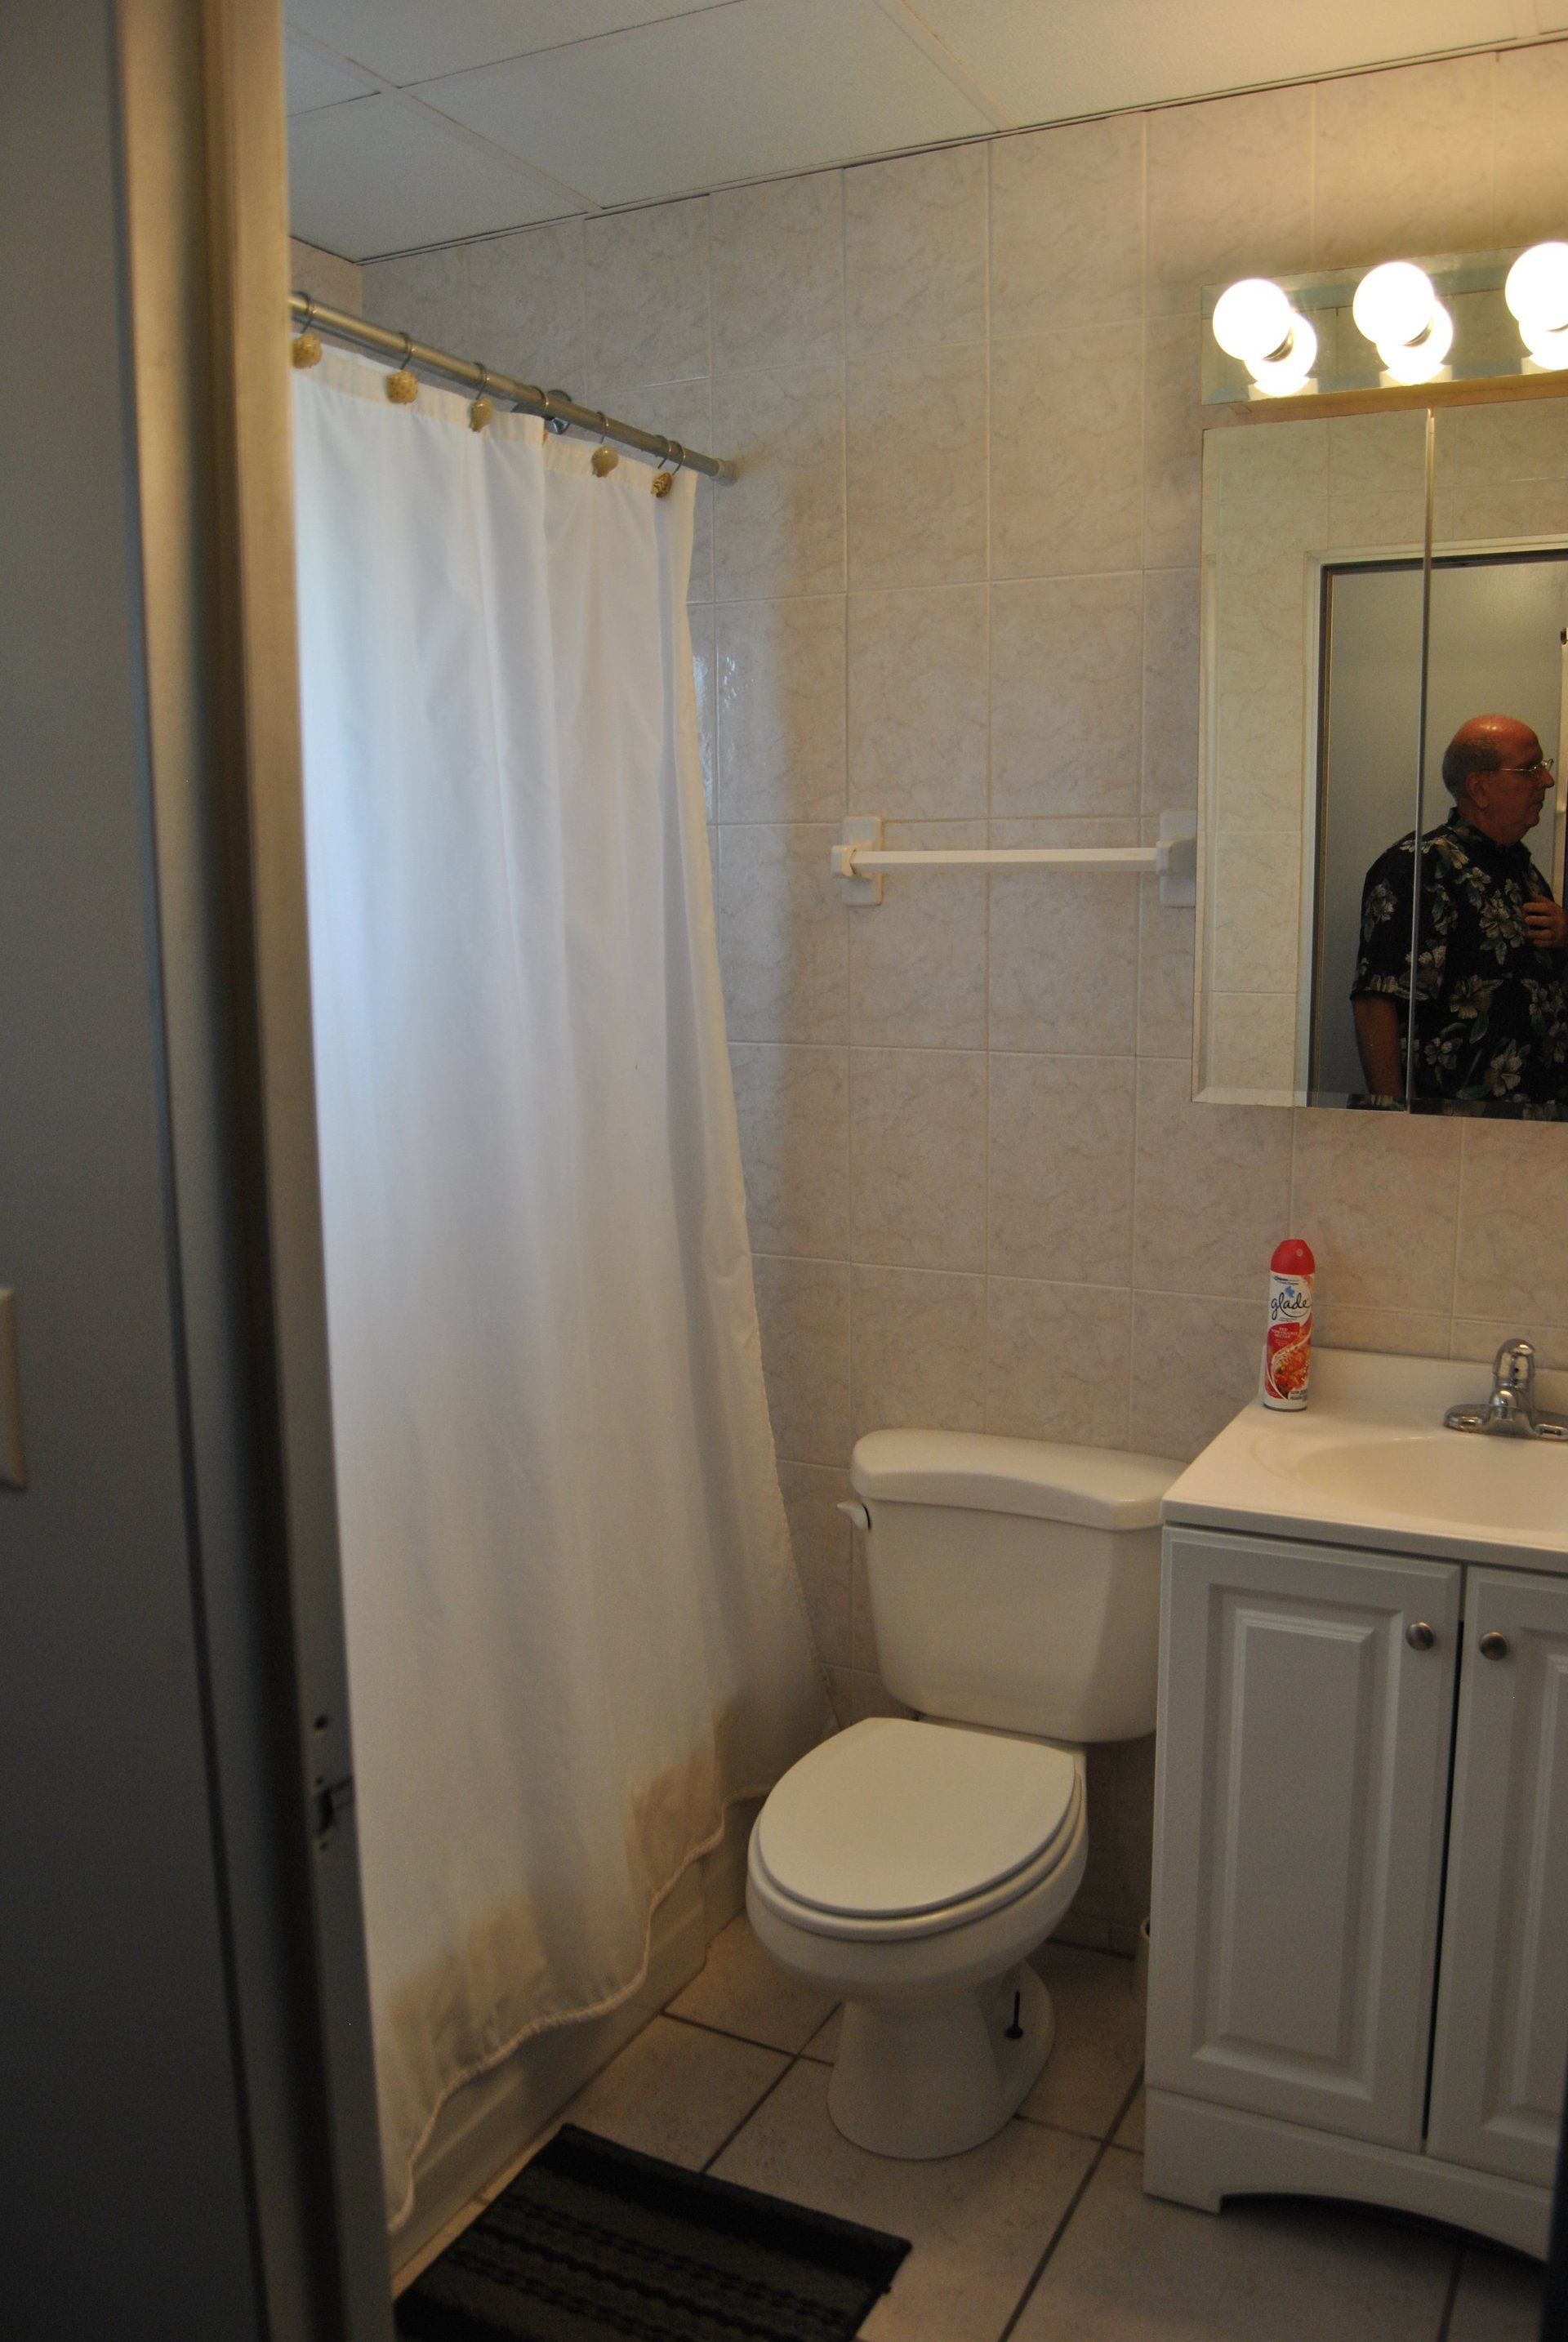 Bathroom with sink, toilet, tub and shower curtain